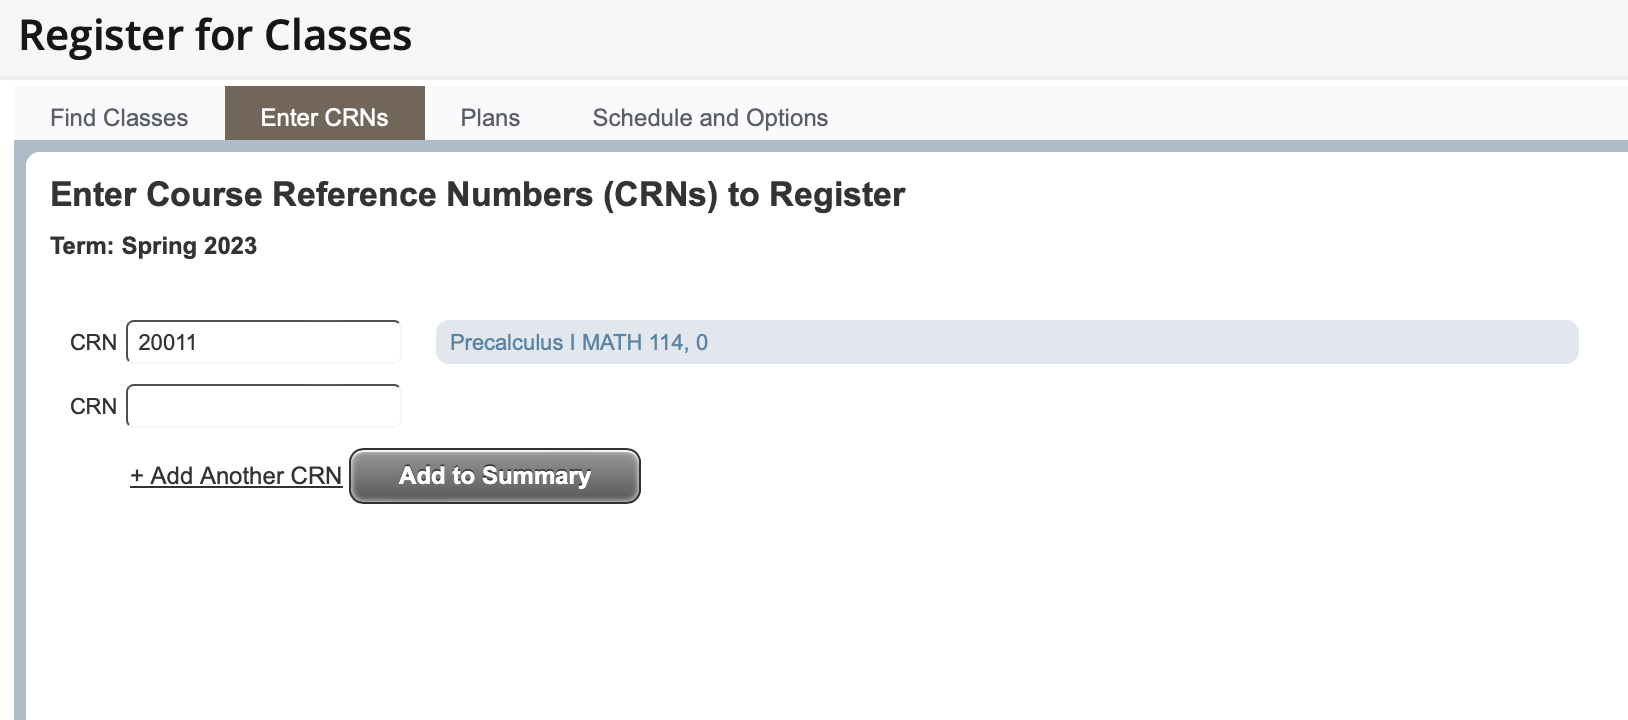 Feature is showcased with a CRN showing Math 114.